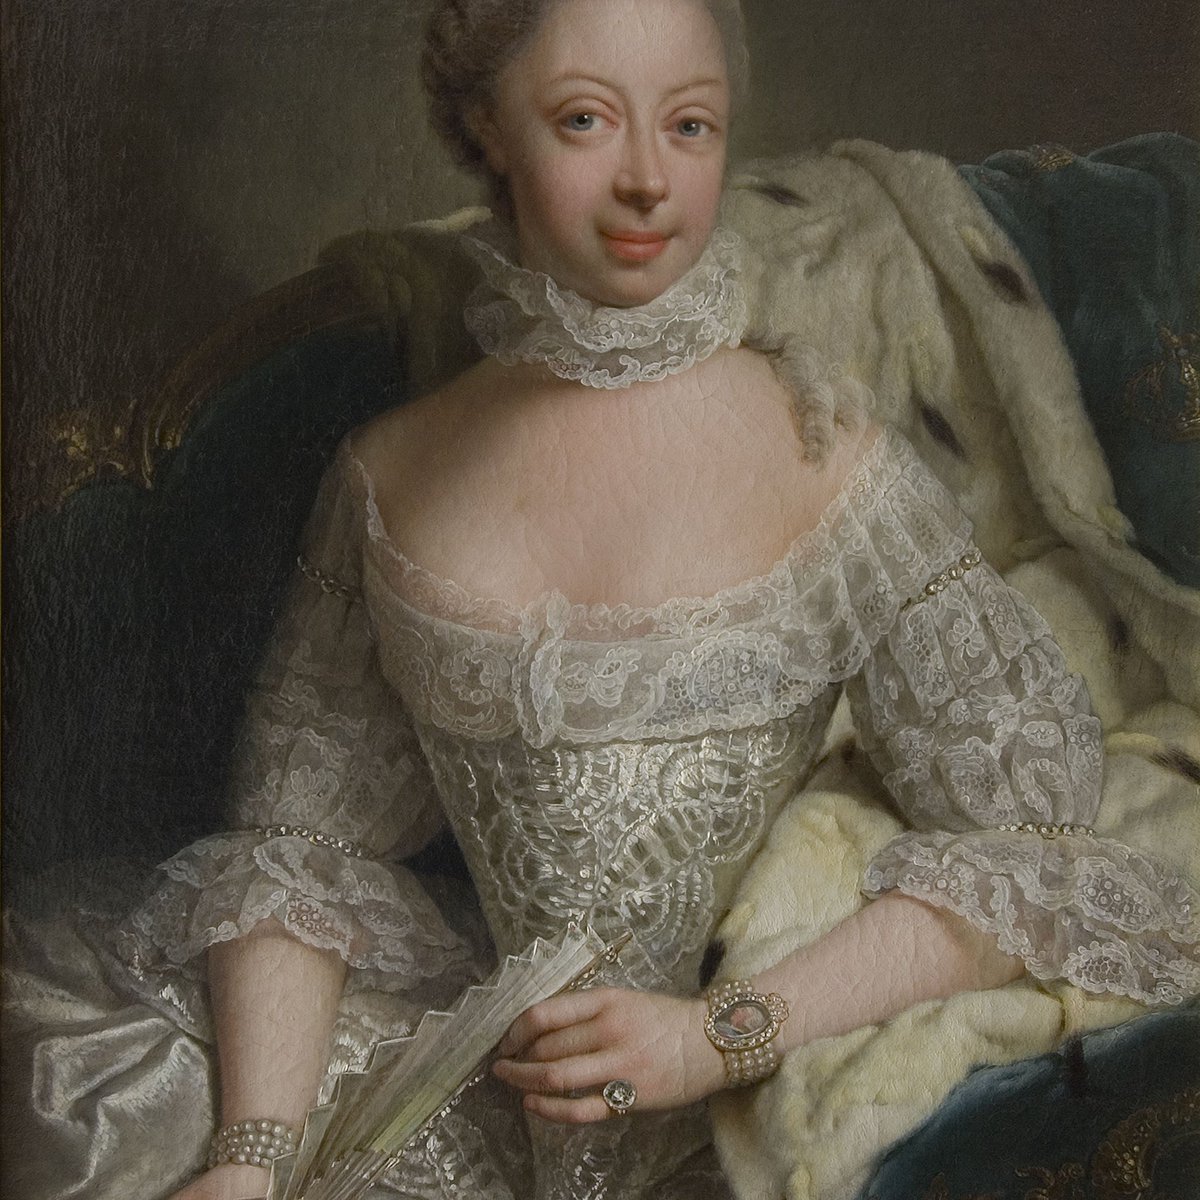 Being a lover of kids, Queen Charlotte opened orphanages